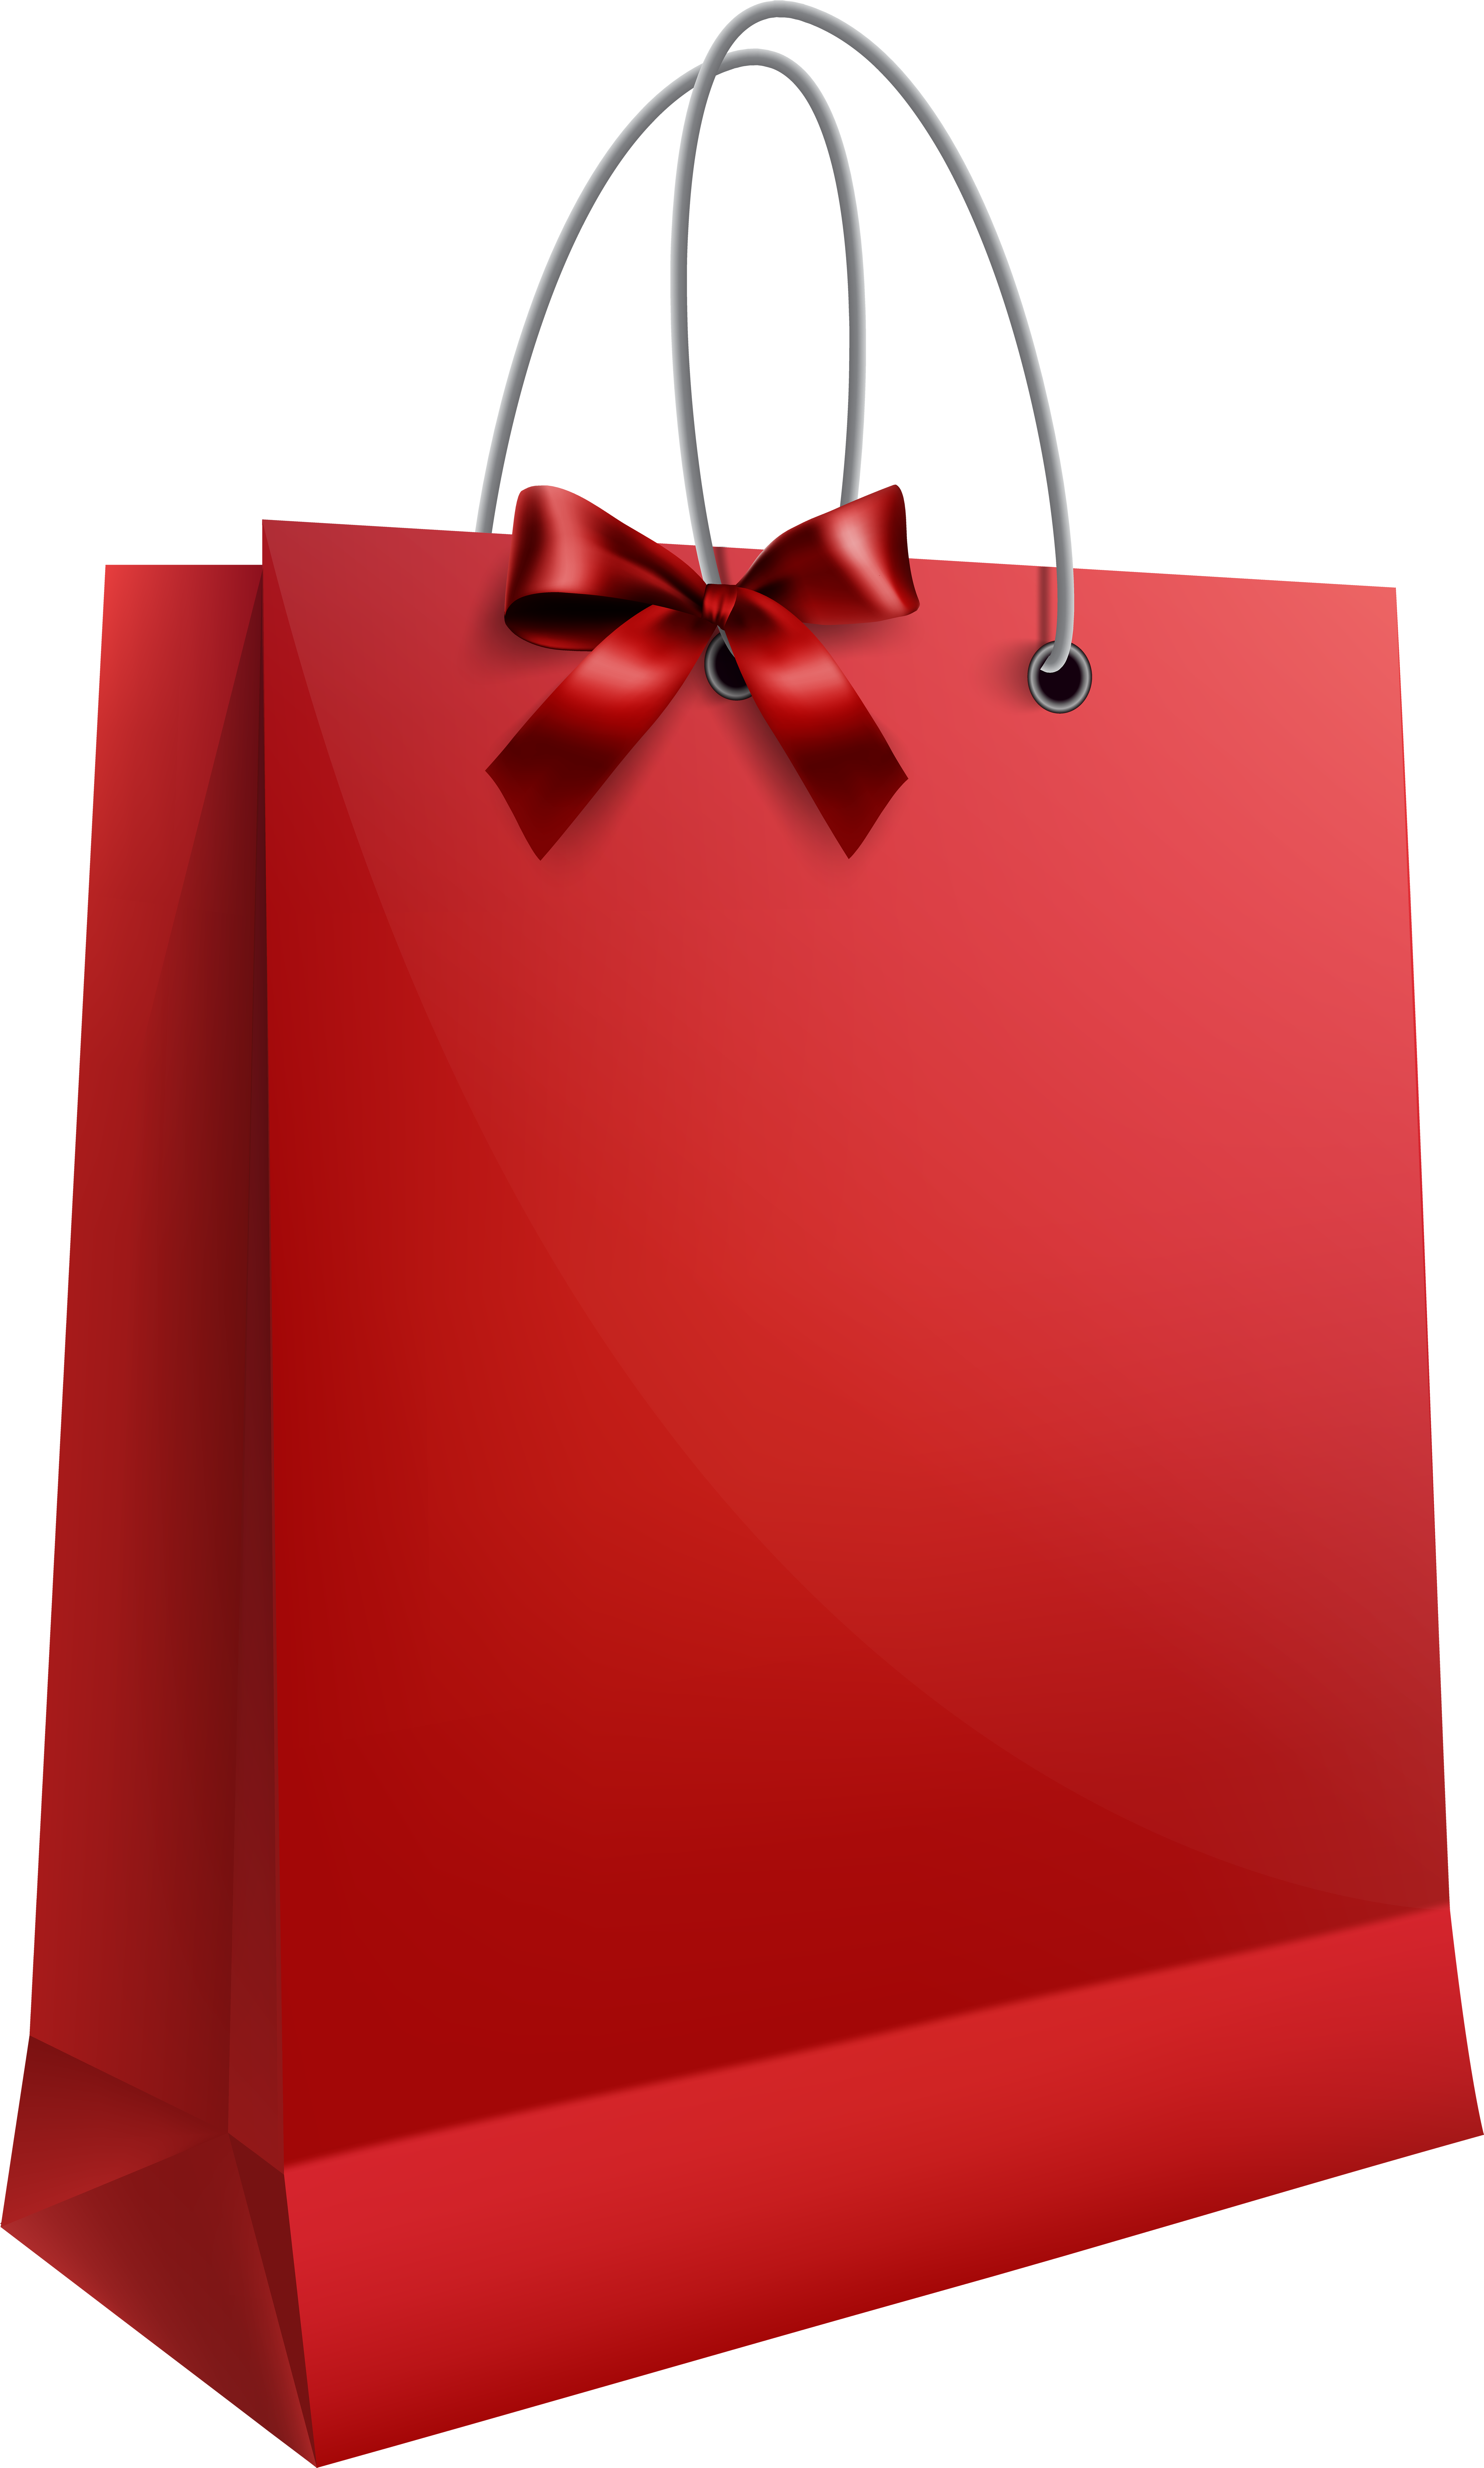 Gift Bag With Bow Png Clip Art - Christmas Gift Bag Transparent, Png Download